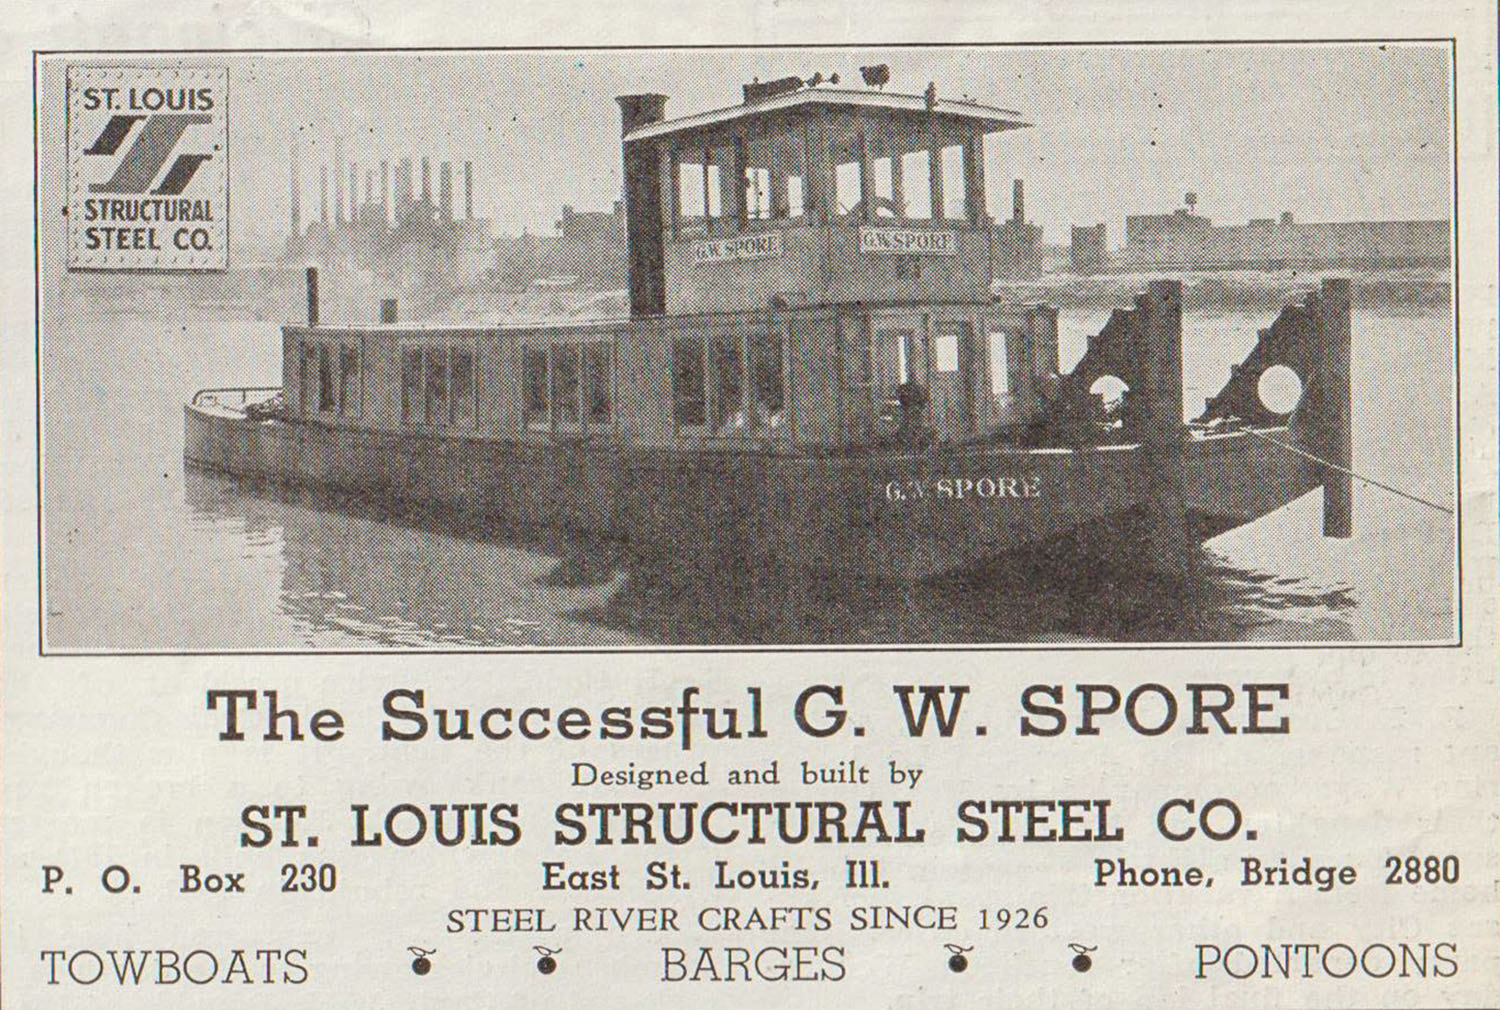 St. Louis Structural Steel ad featuring the G.W. Spore, WJ June 30, 1934. (David Smith collection)